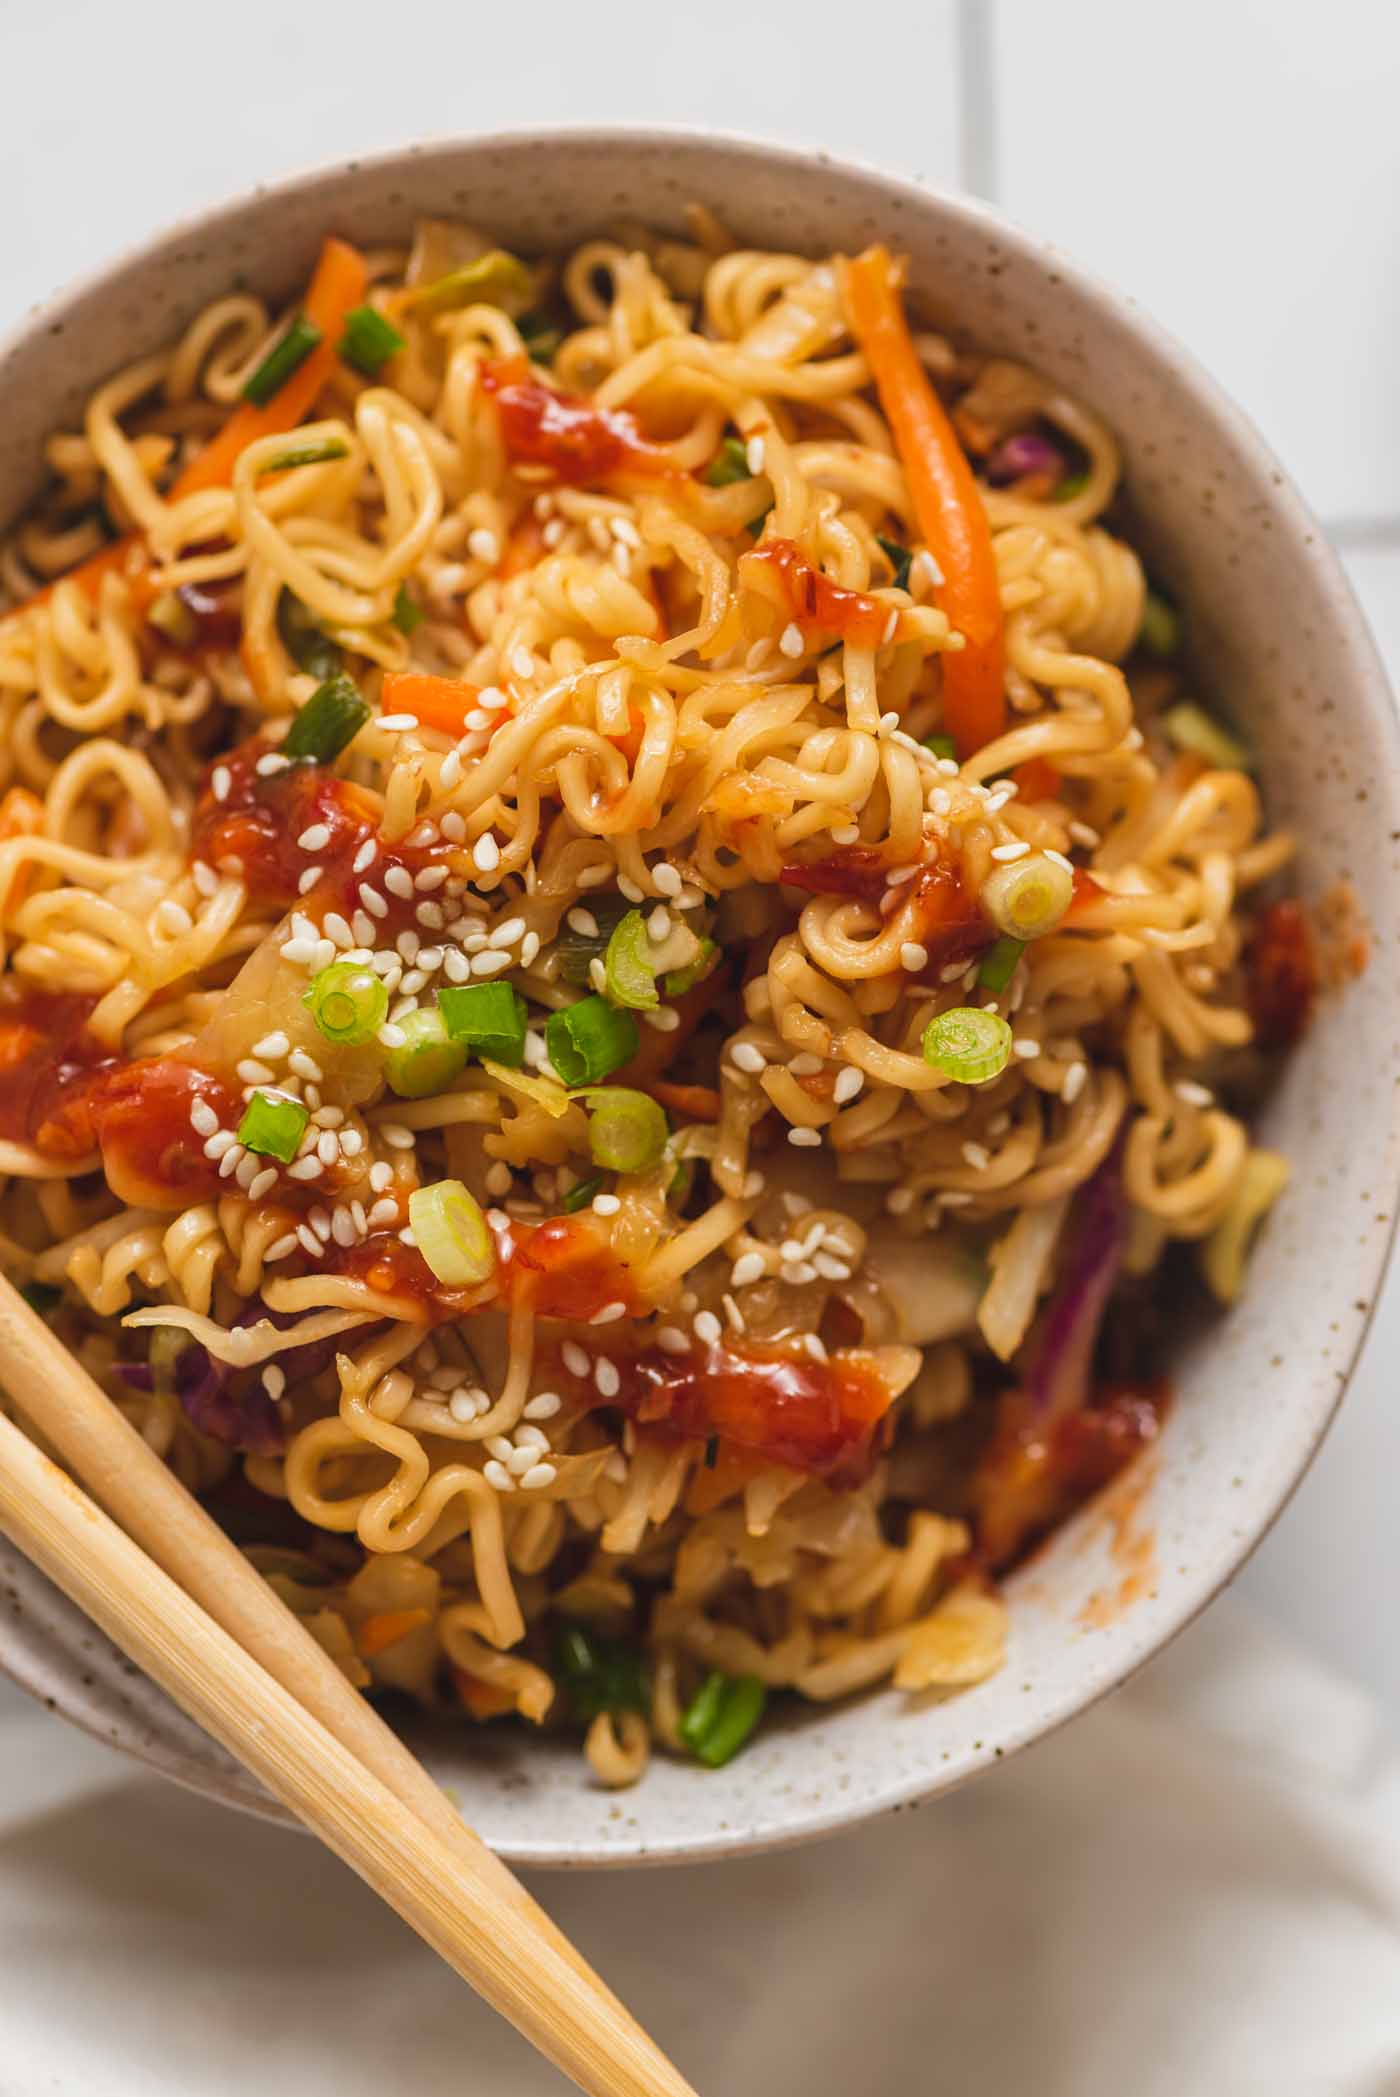 Quickly make perfectly sized ramen noodles, pasta, soups, stir-fry, br